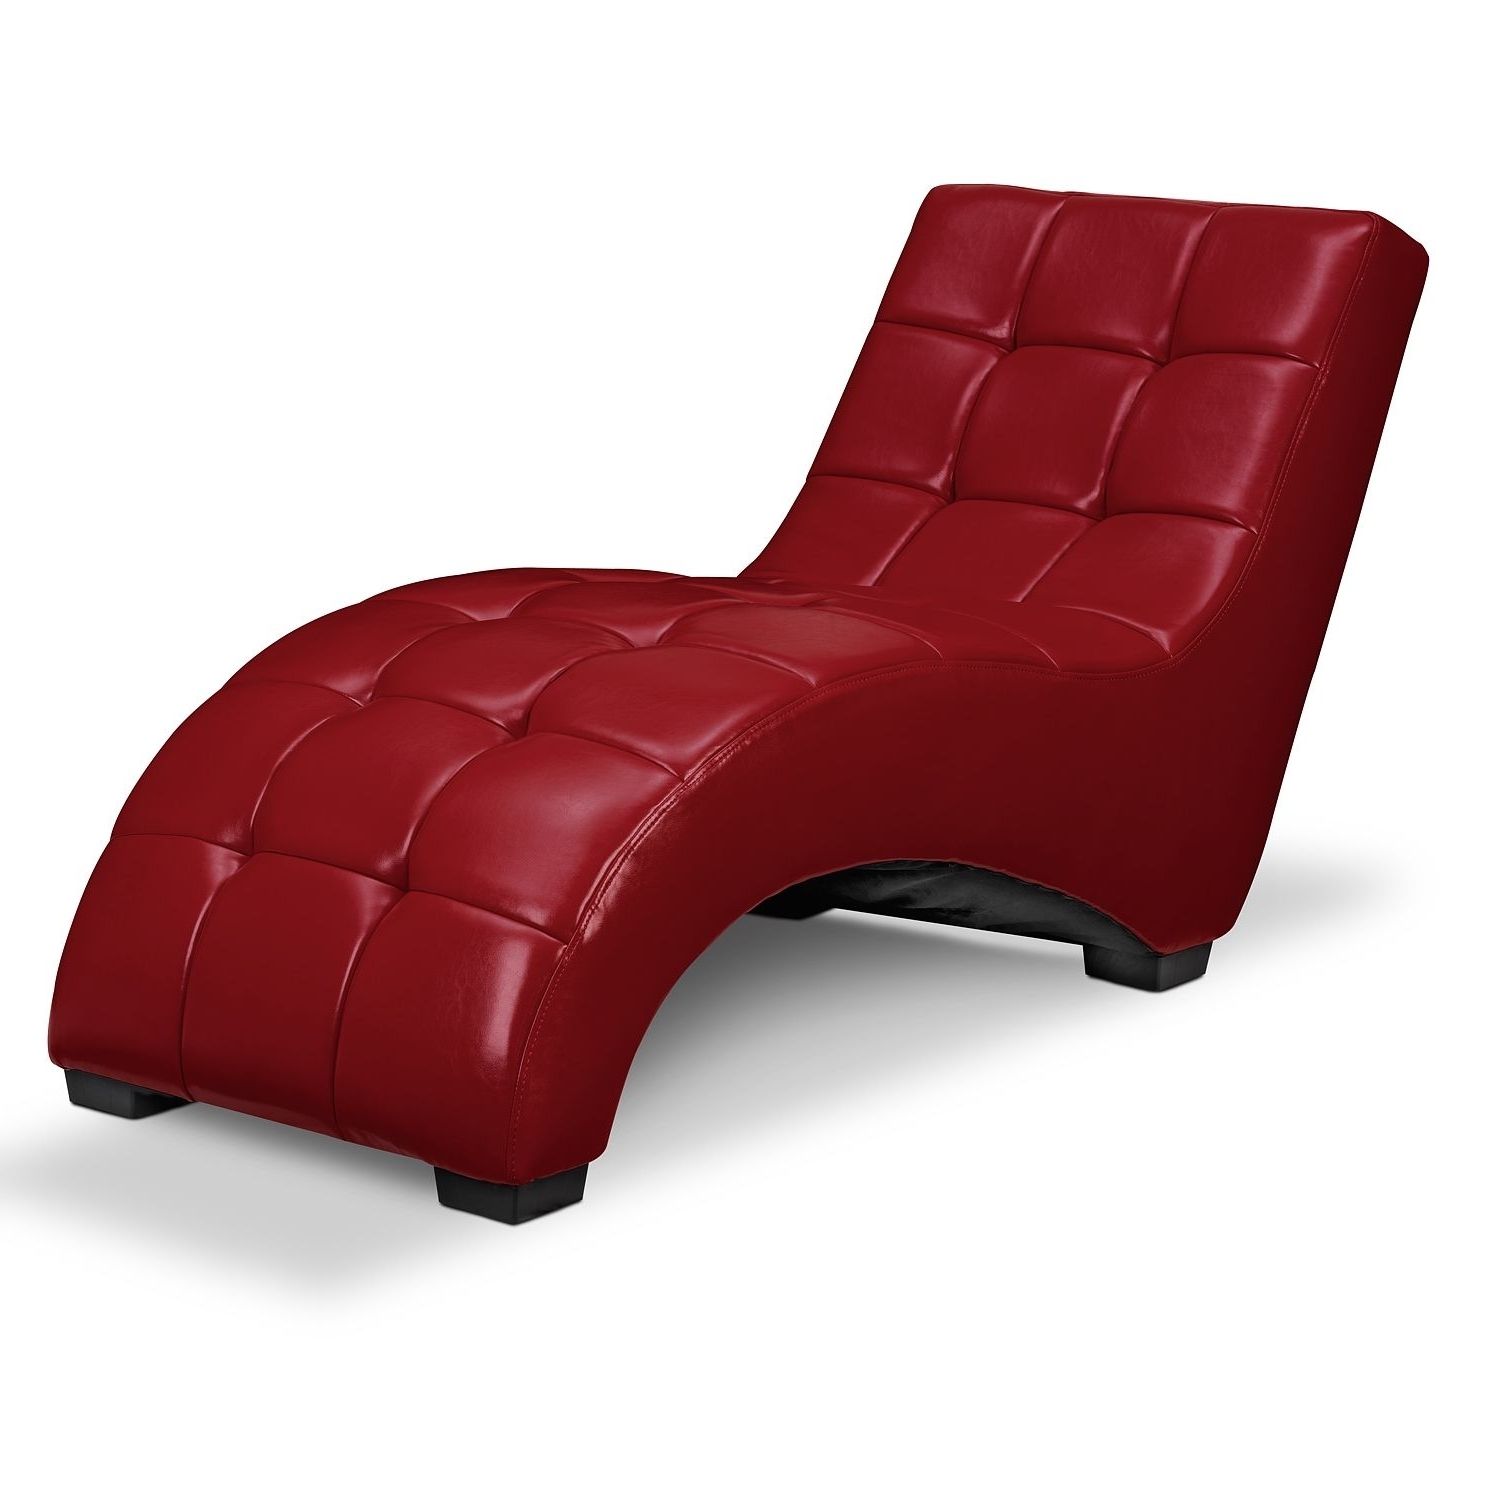 Pinterest Pertaining To Popular Leather Chaises (View 8 of 15)